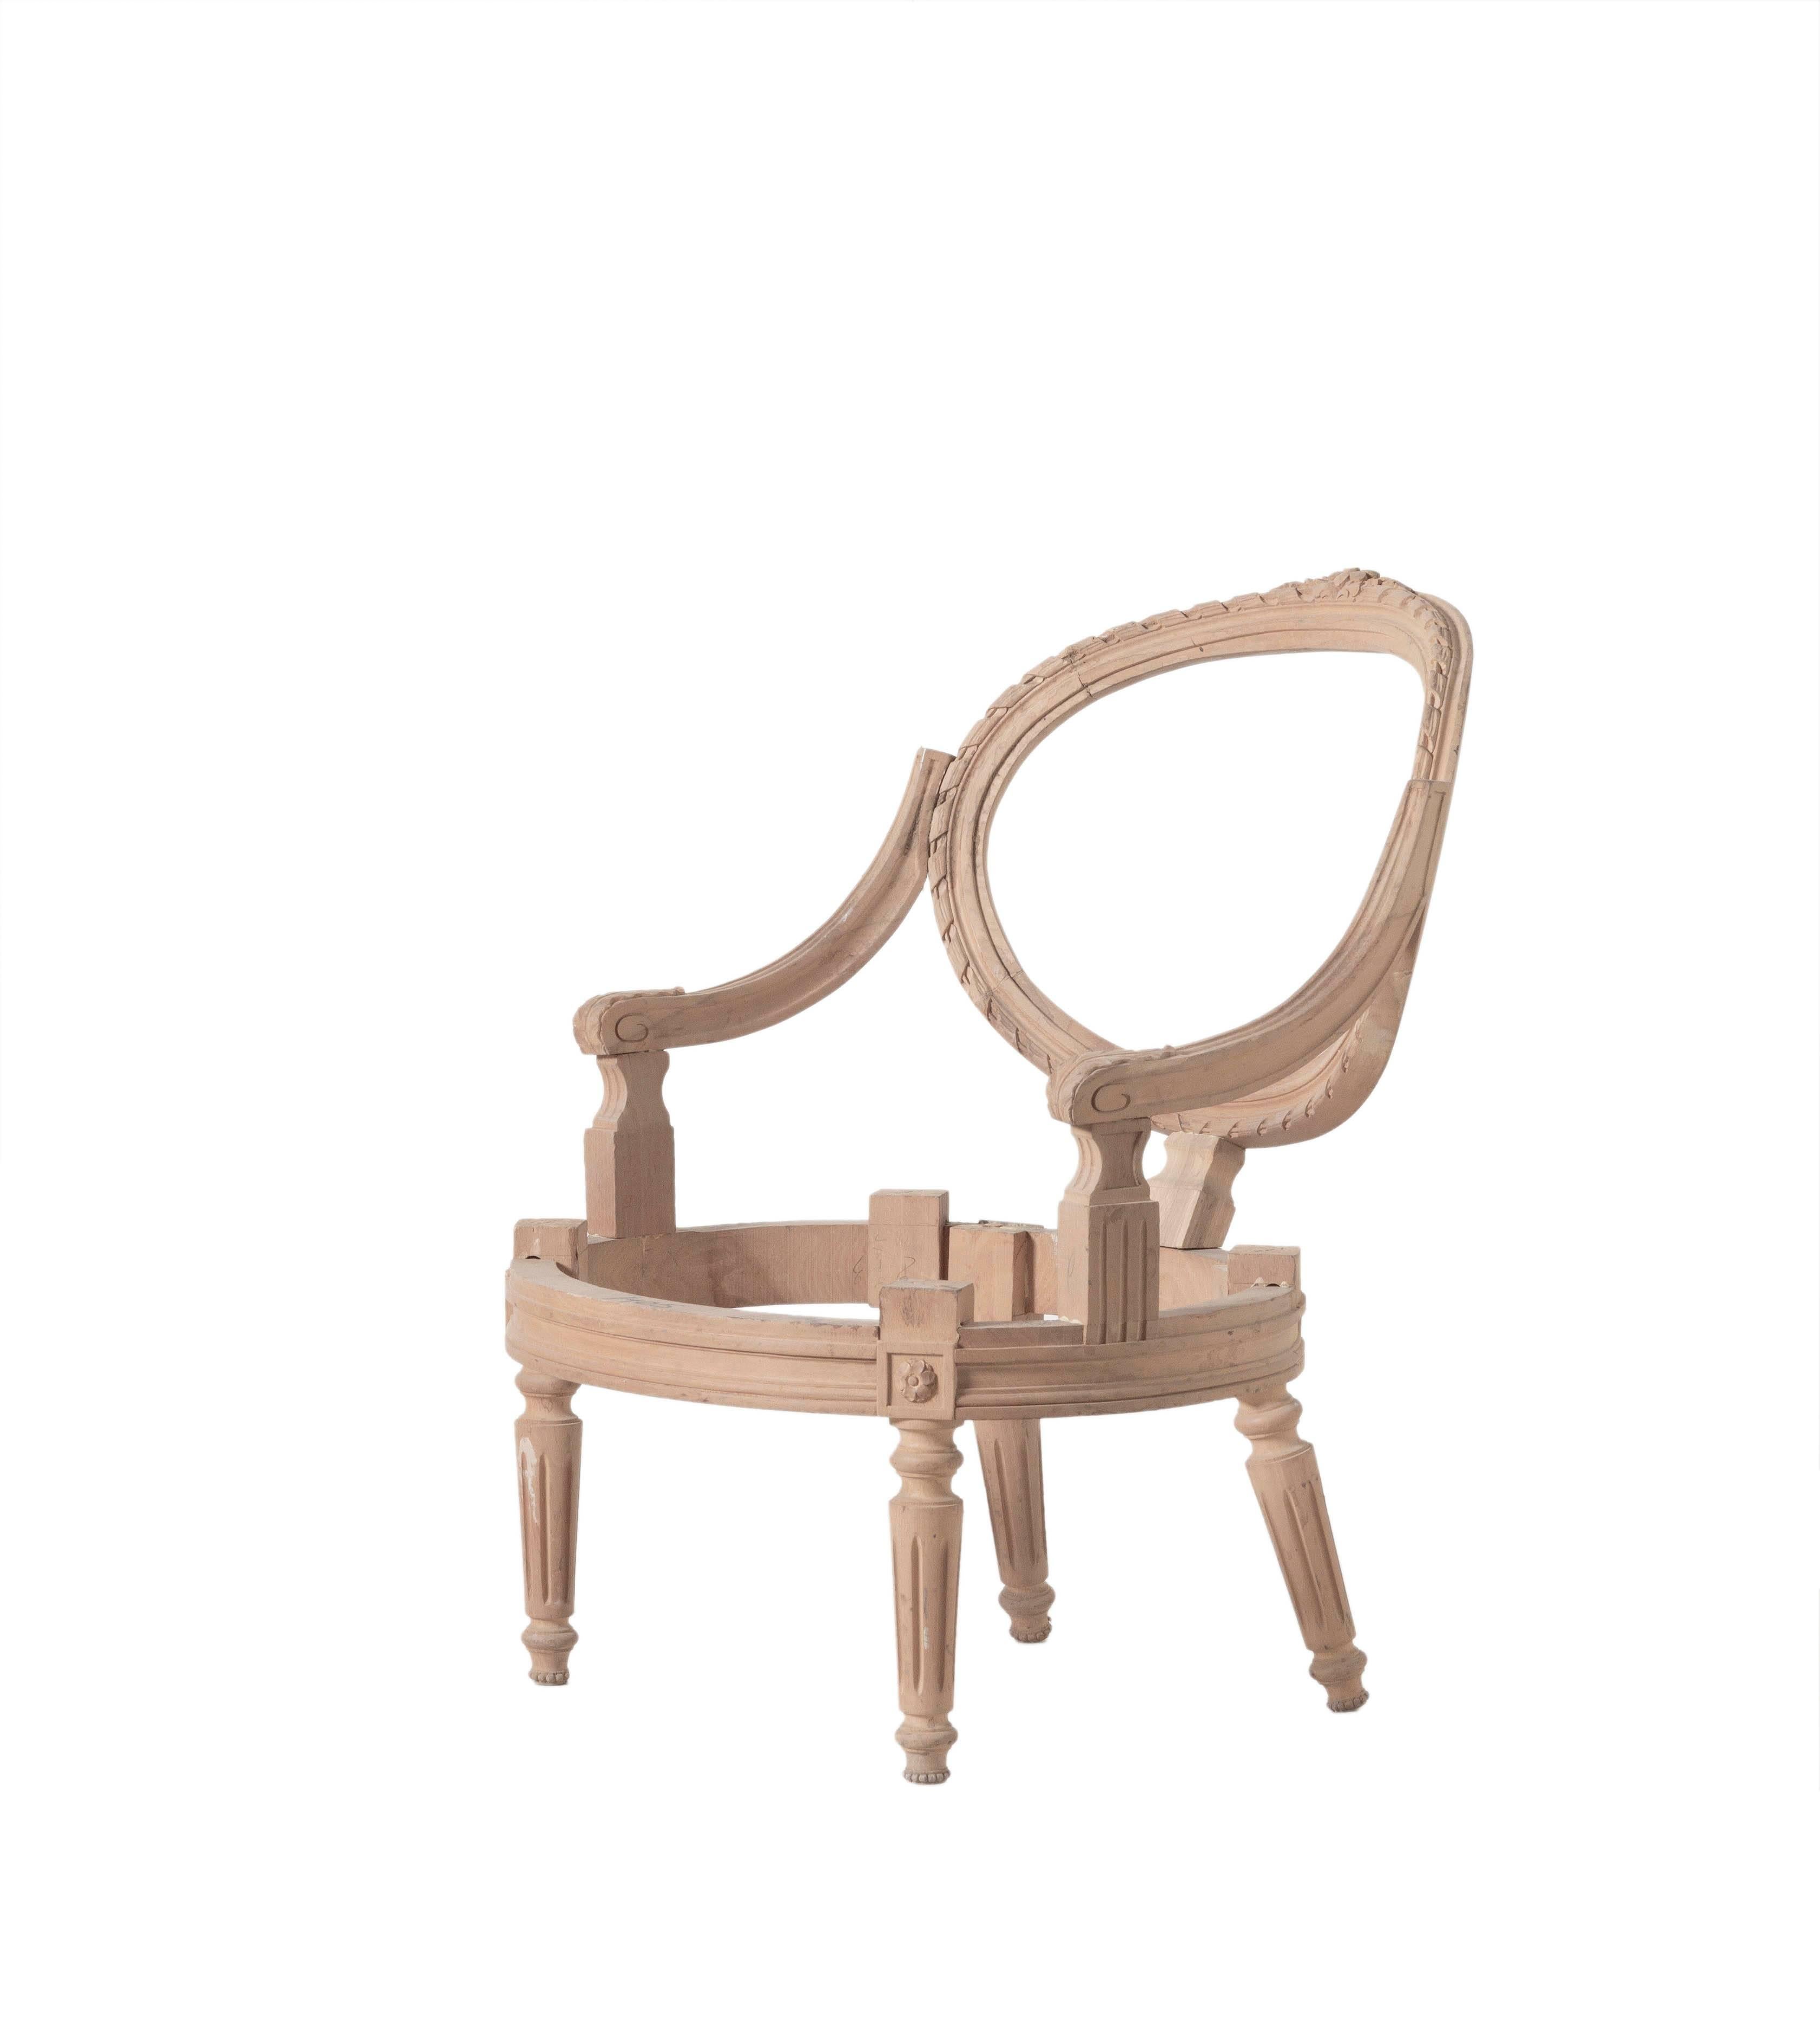 Louis XVI style child’s bregere hand-carved Italian chair in beechwood
Unfinished raw wood
Size: 26.25